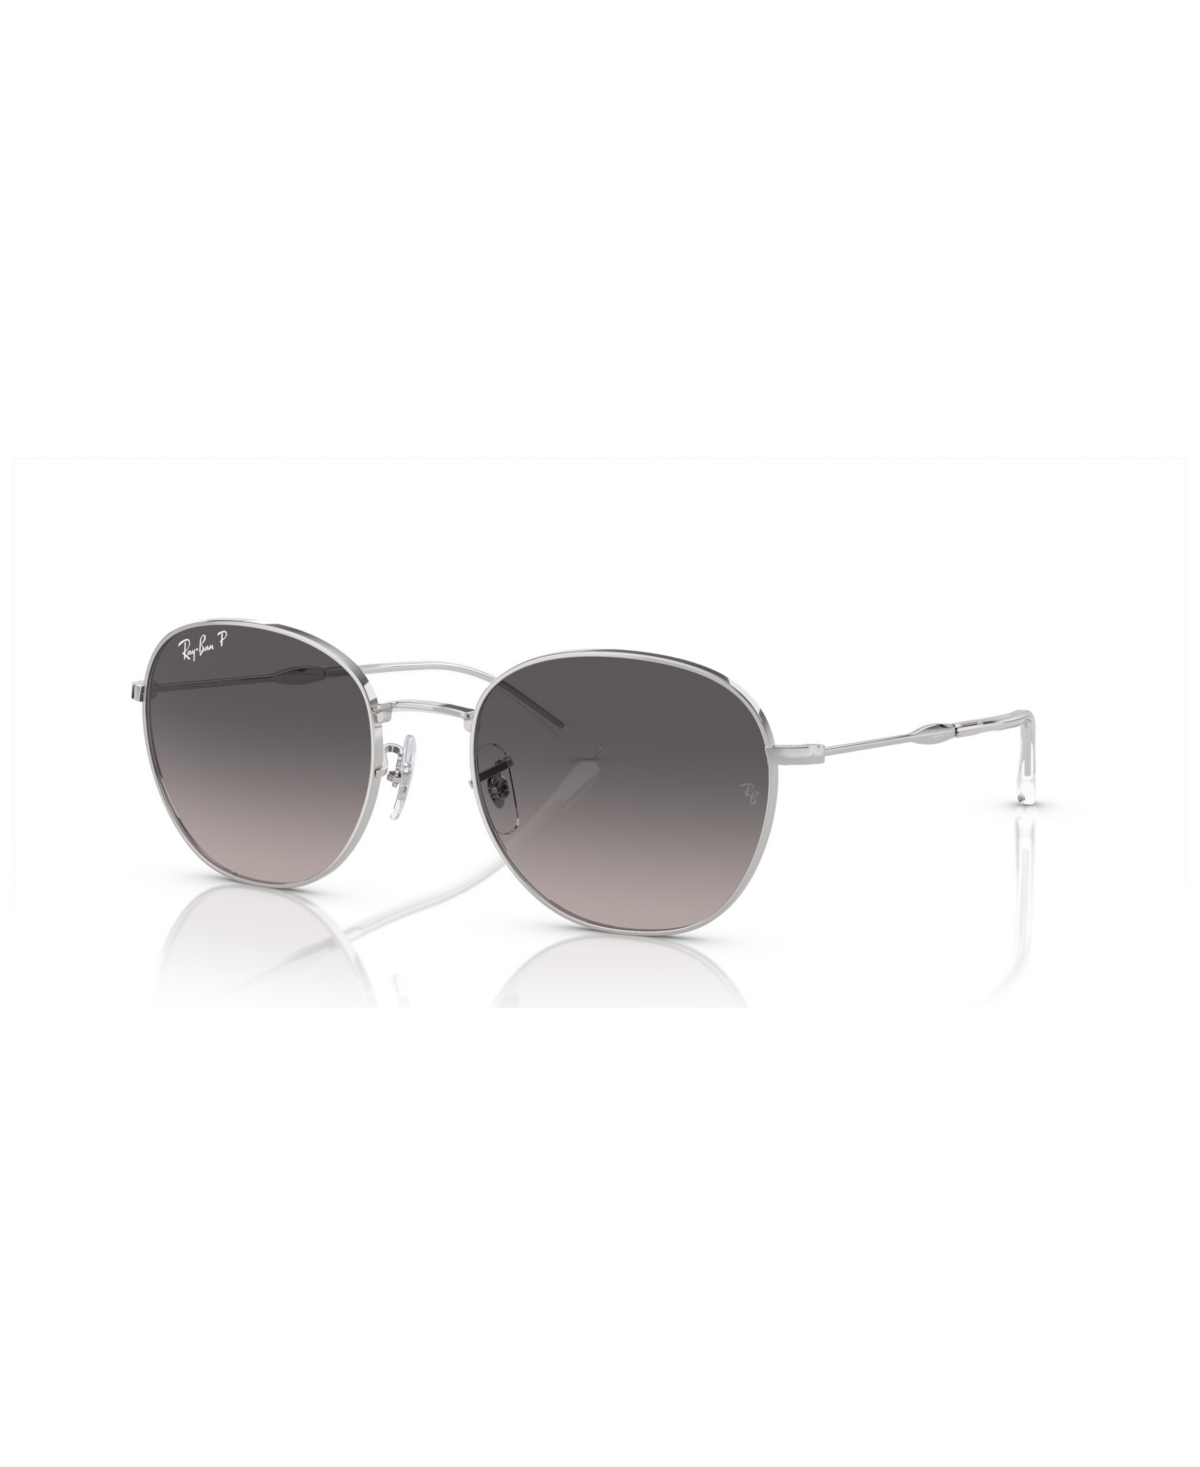 Ray Ban Unisex Polarized Sunglasses, Gradient Rb3809 In Silver